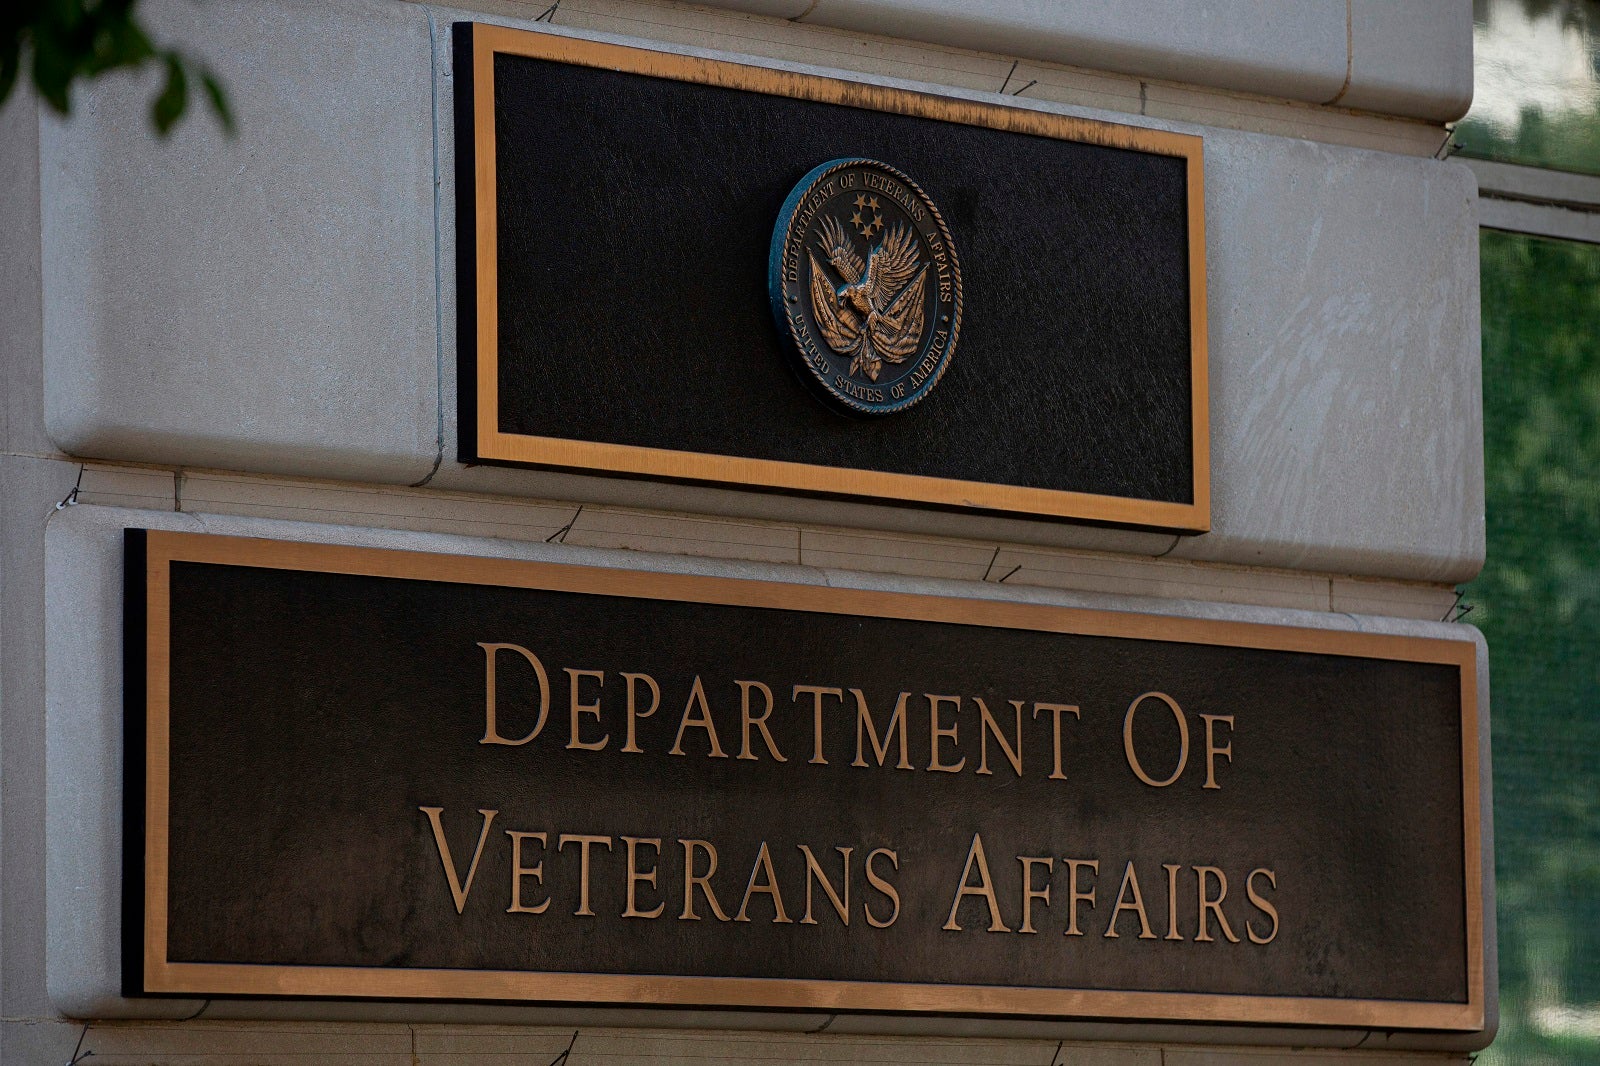 The US Department of Veterans Affairs building is seen in Washington, DC, on July 22, 2019. (Alastair Pike/AFP via Getty Images)